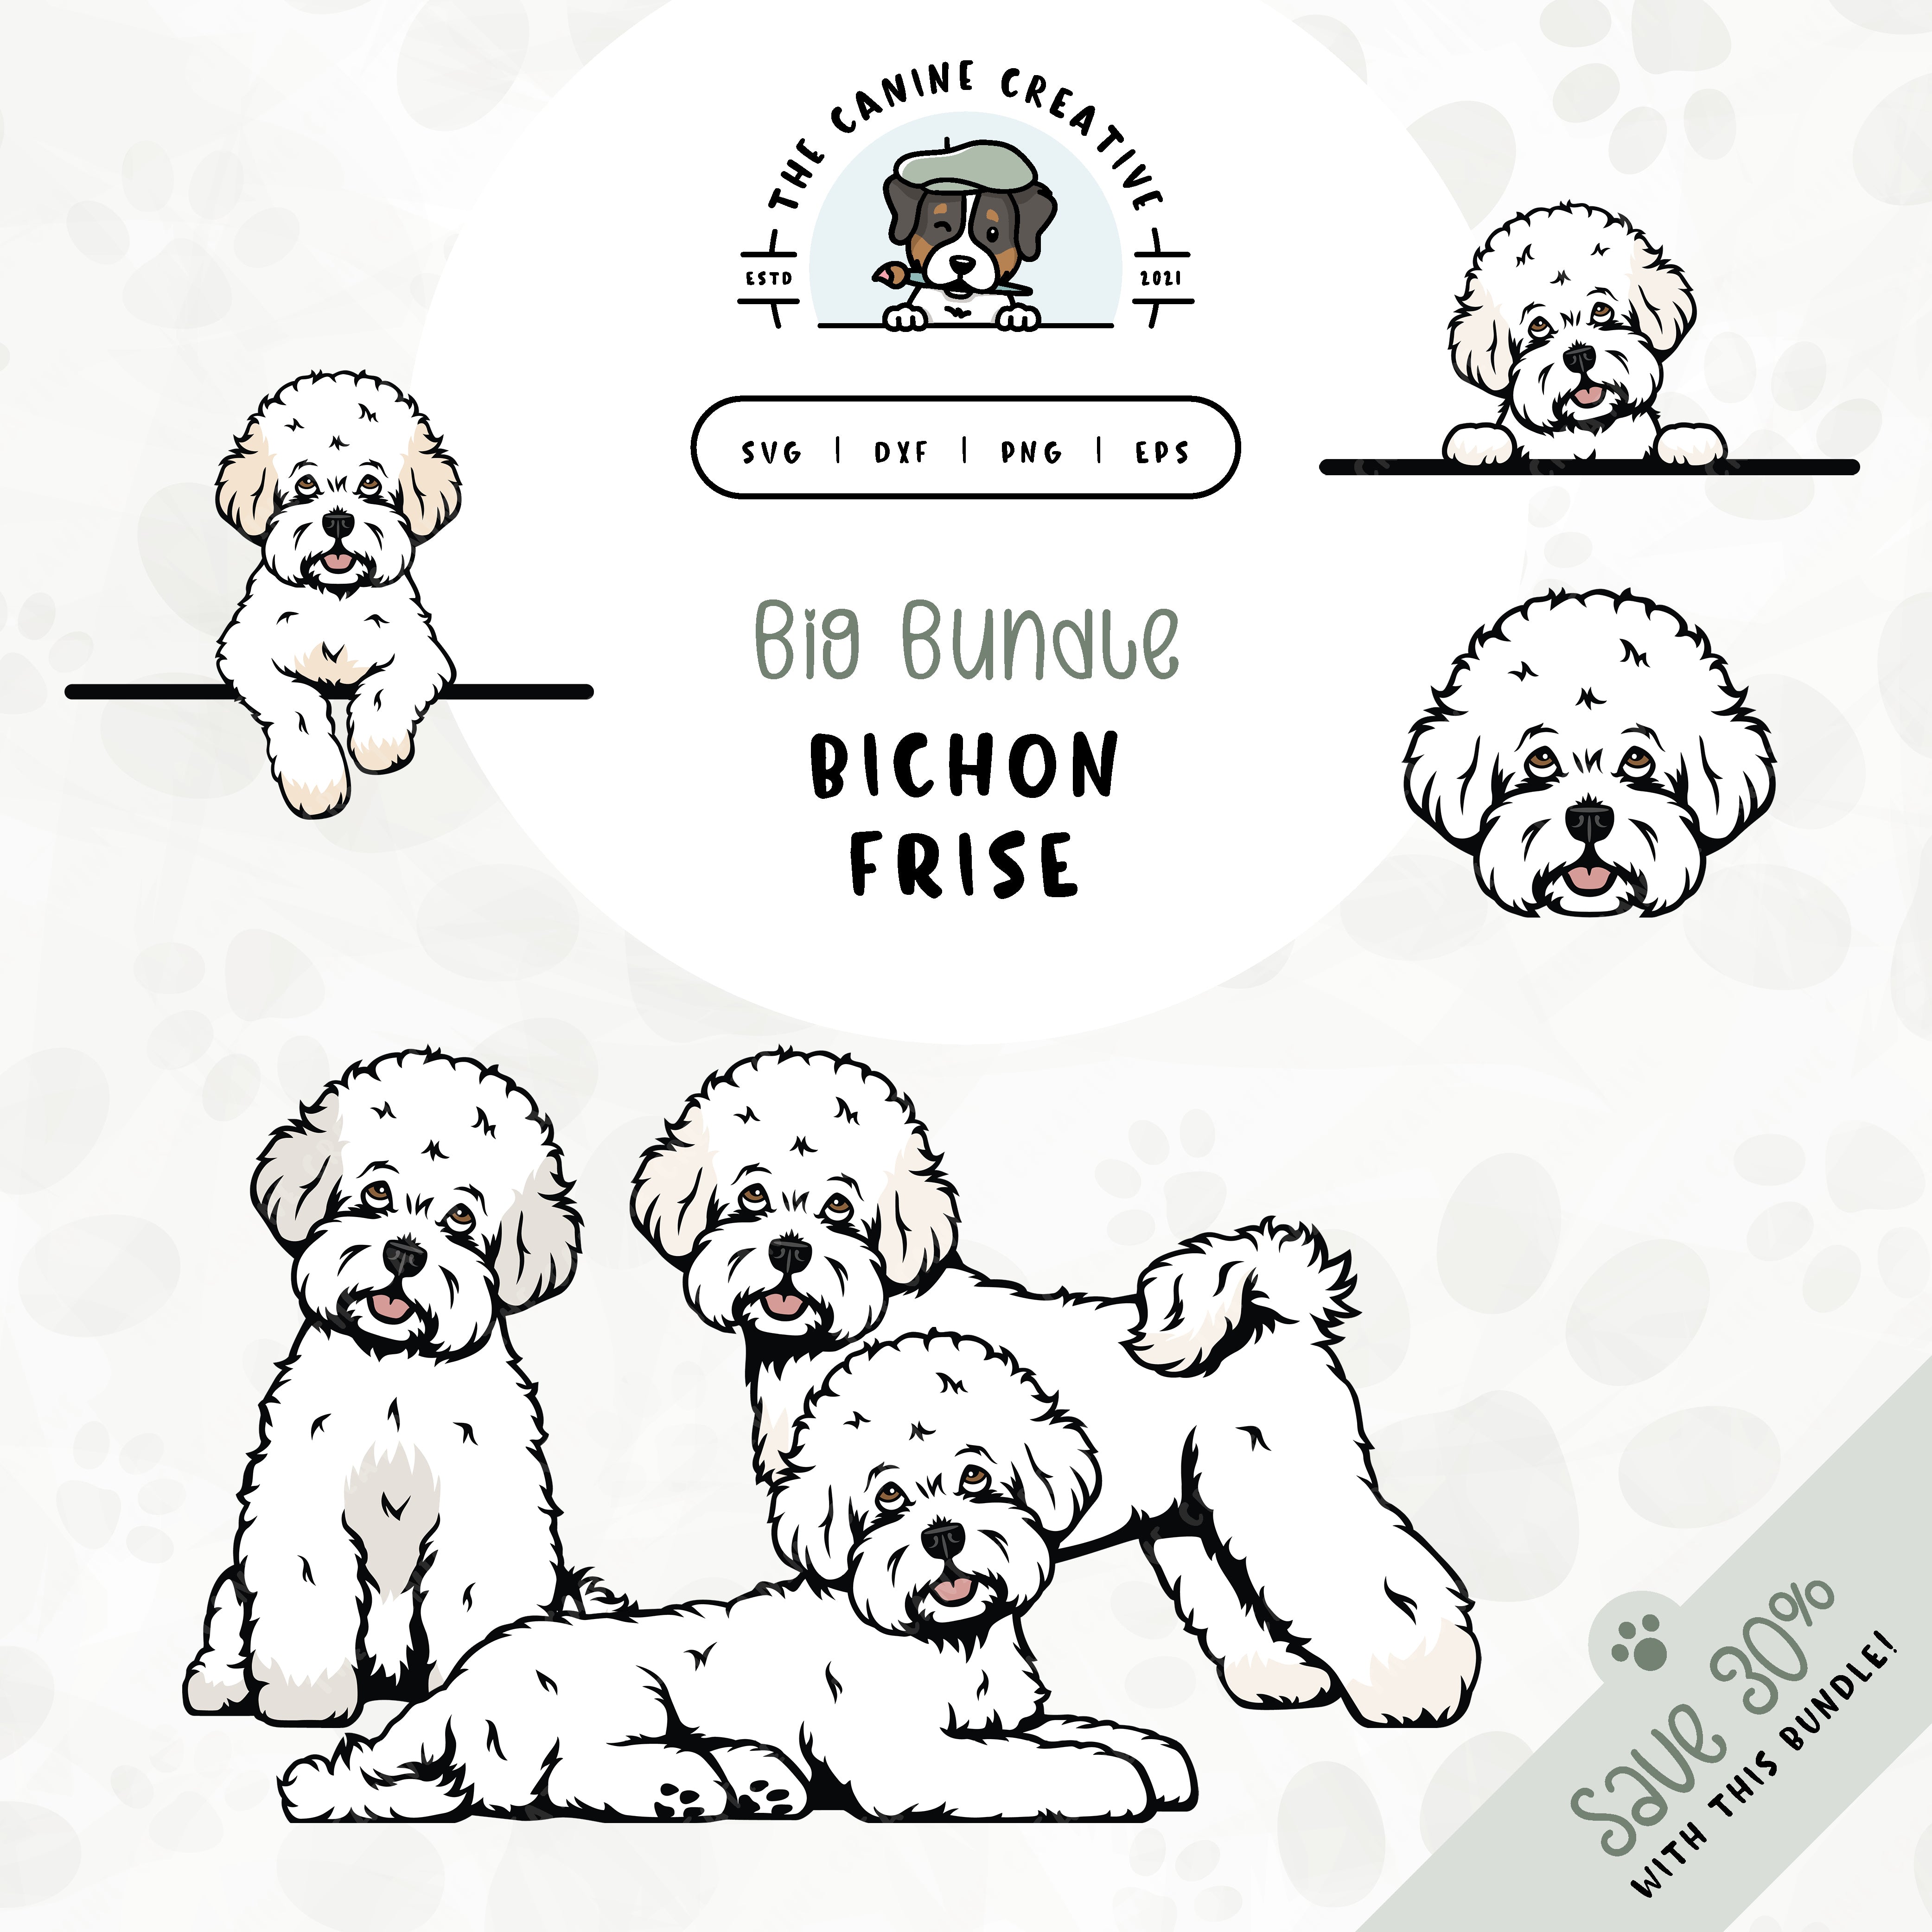 This 6-pack Bichon Frise design bundle includes dog faces and five different poses: sitting, standing, laying down, and peeking (2 options). File formats include: SVG, DXF, PNG, and EPS.